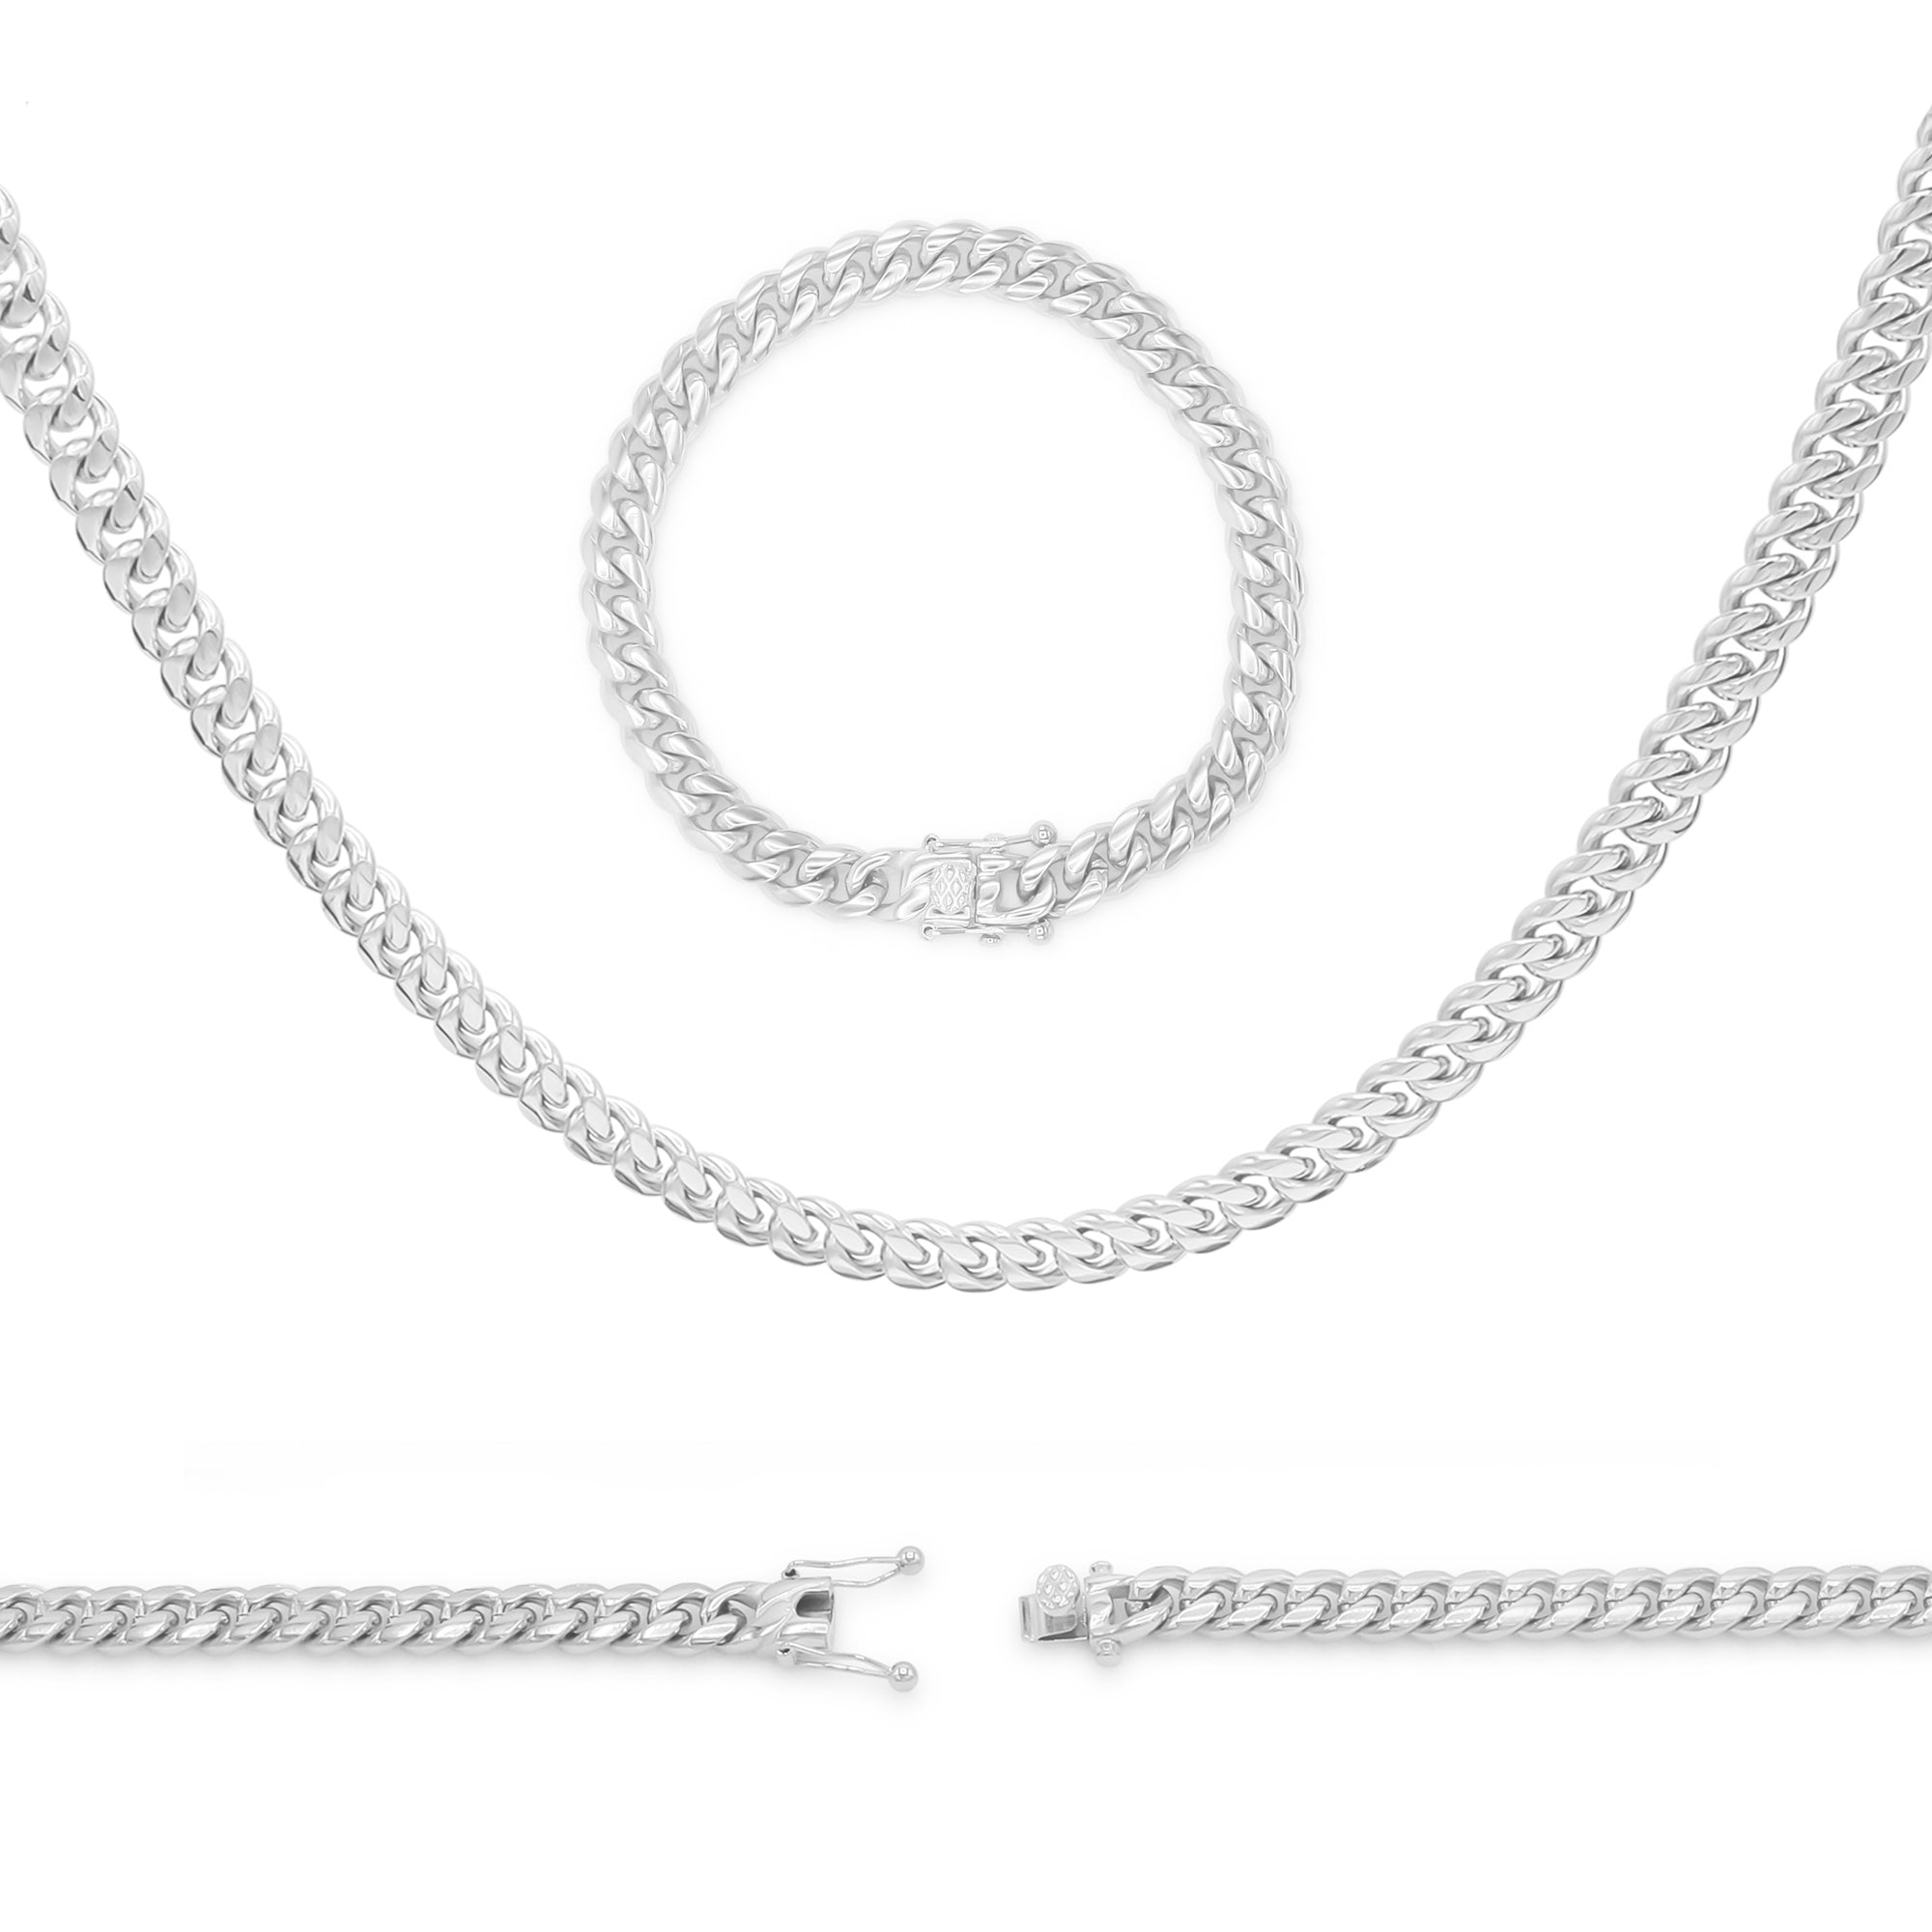 Mens Silver-Tone Stainless Steel Horseshoe Link Chain Necklace - Walmart.com